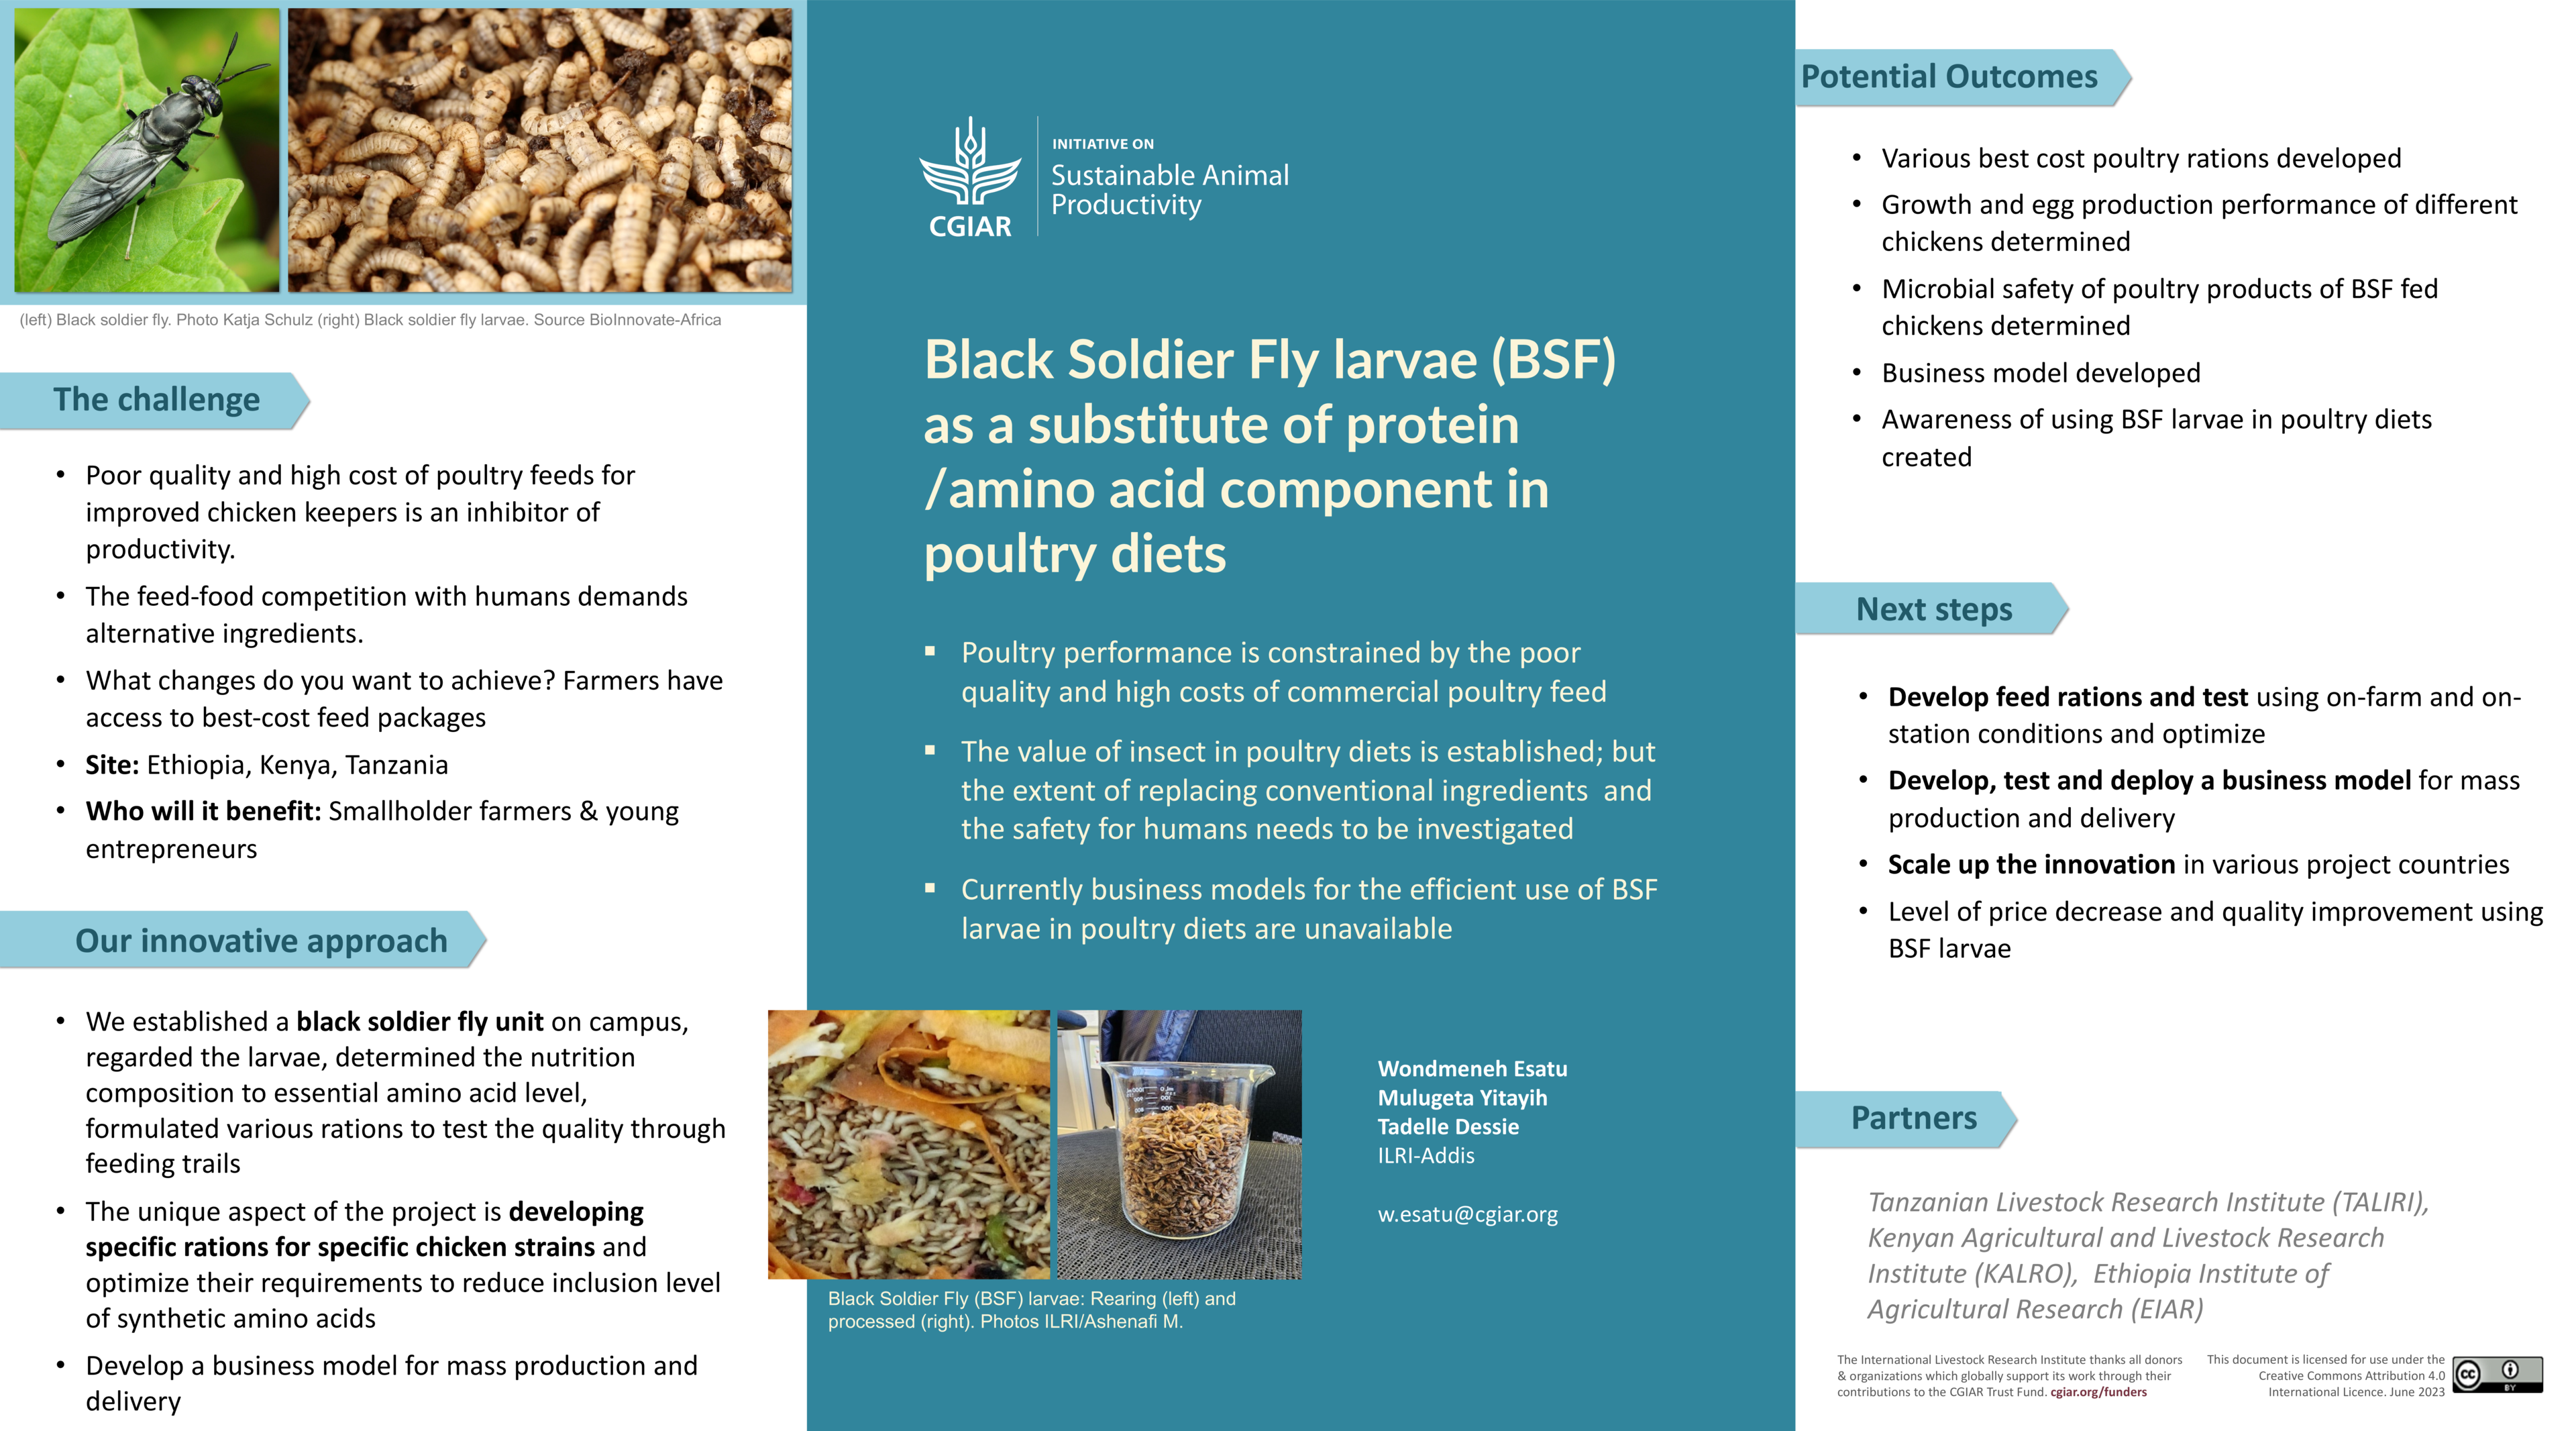 Black Soldier Fly larvae (BSF) as a substitute of protein /amino acid component in poultry diets